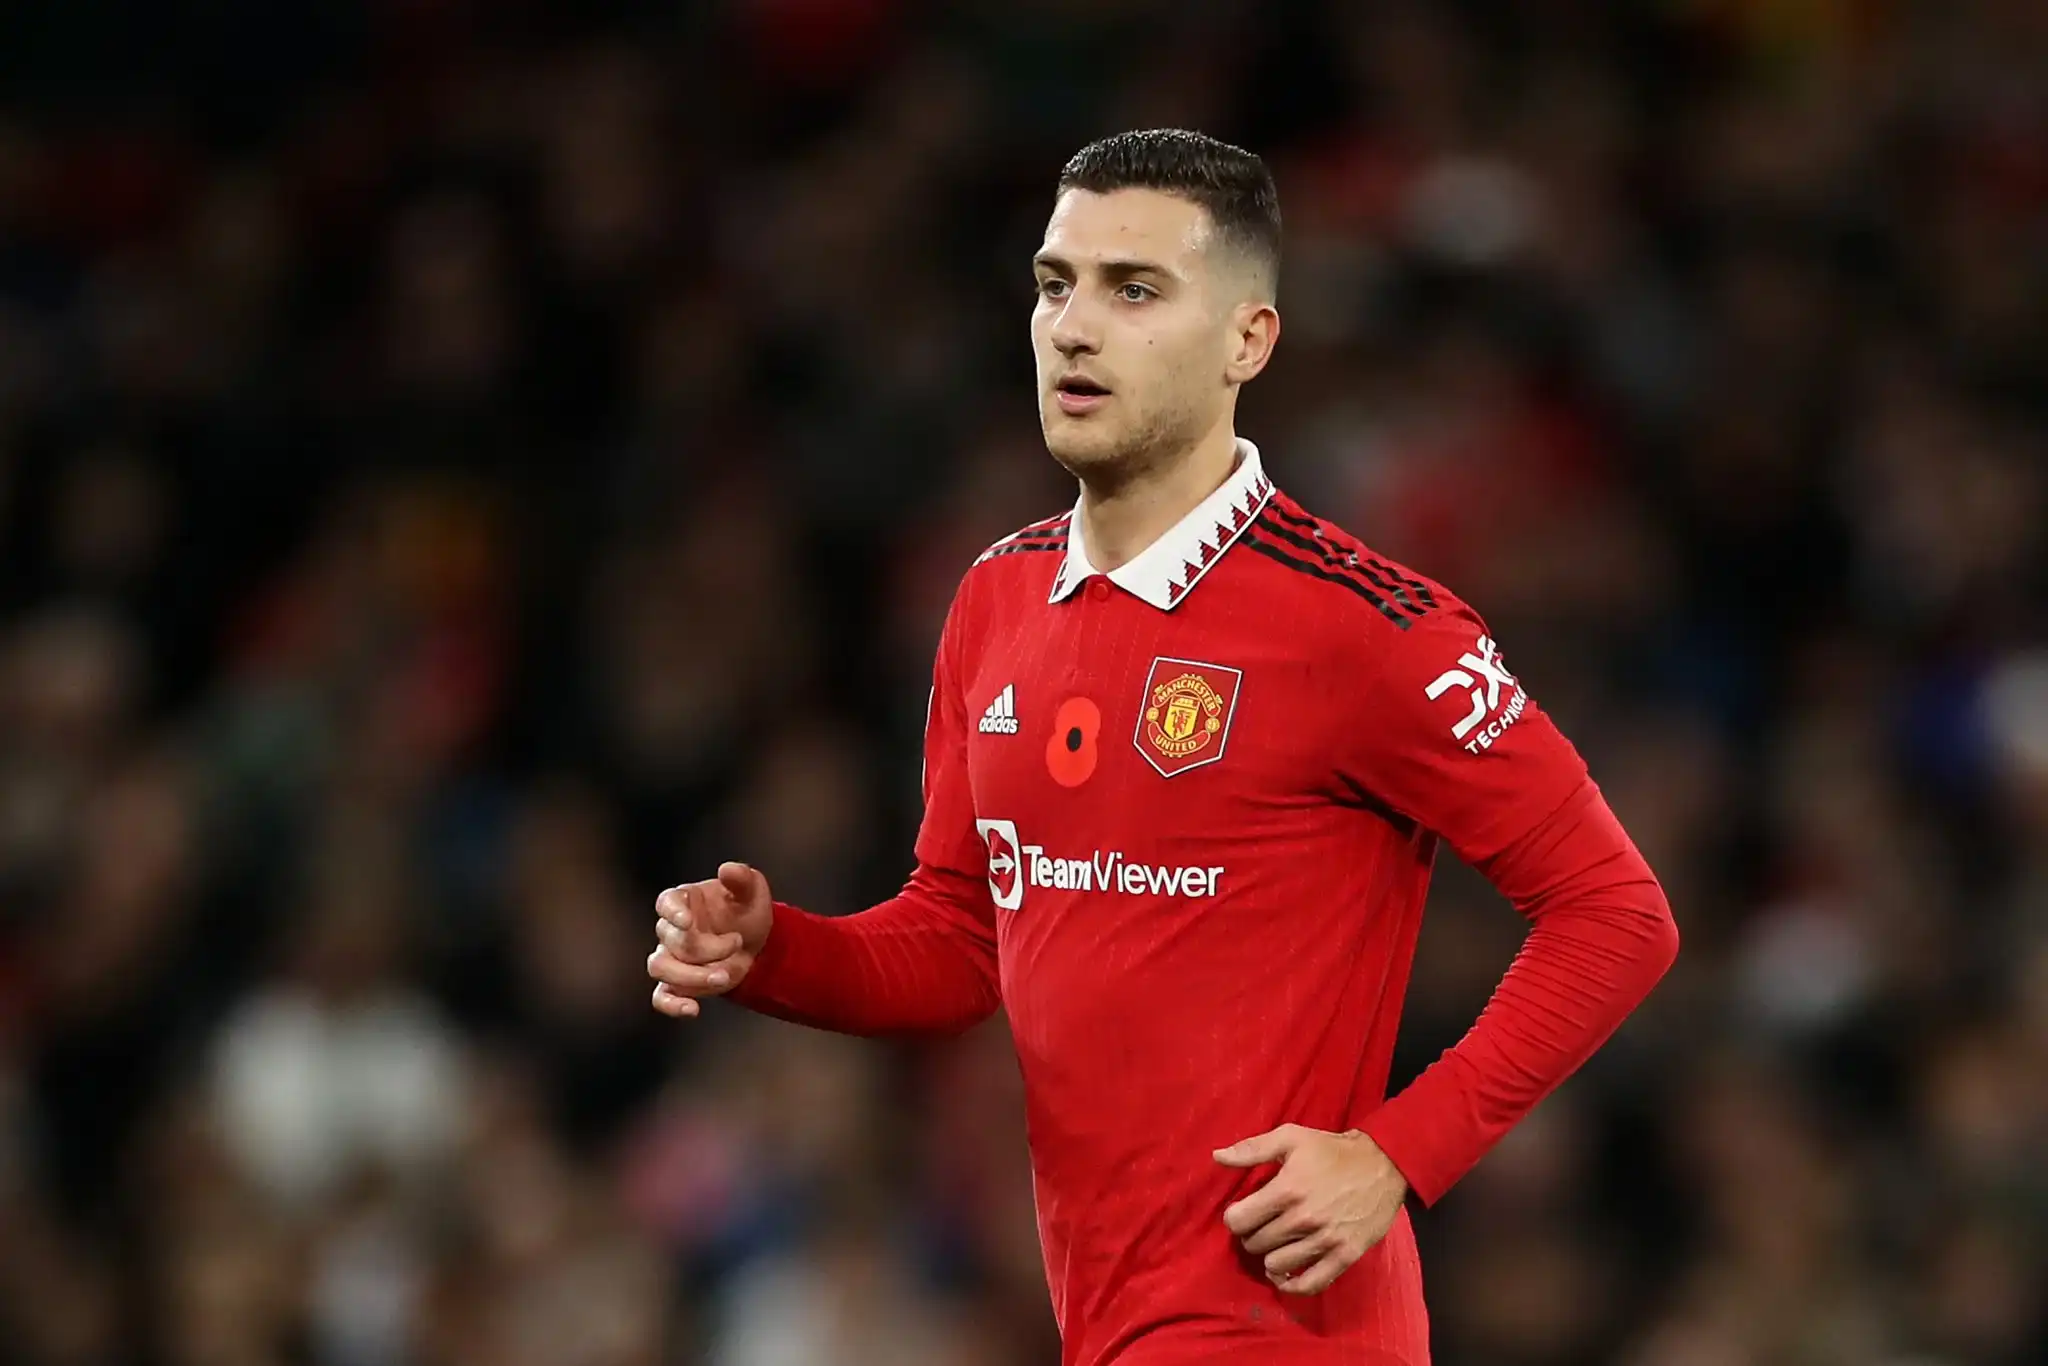 Diogo Dalot DOUBLES Manchester United's lead against Forest